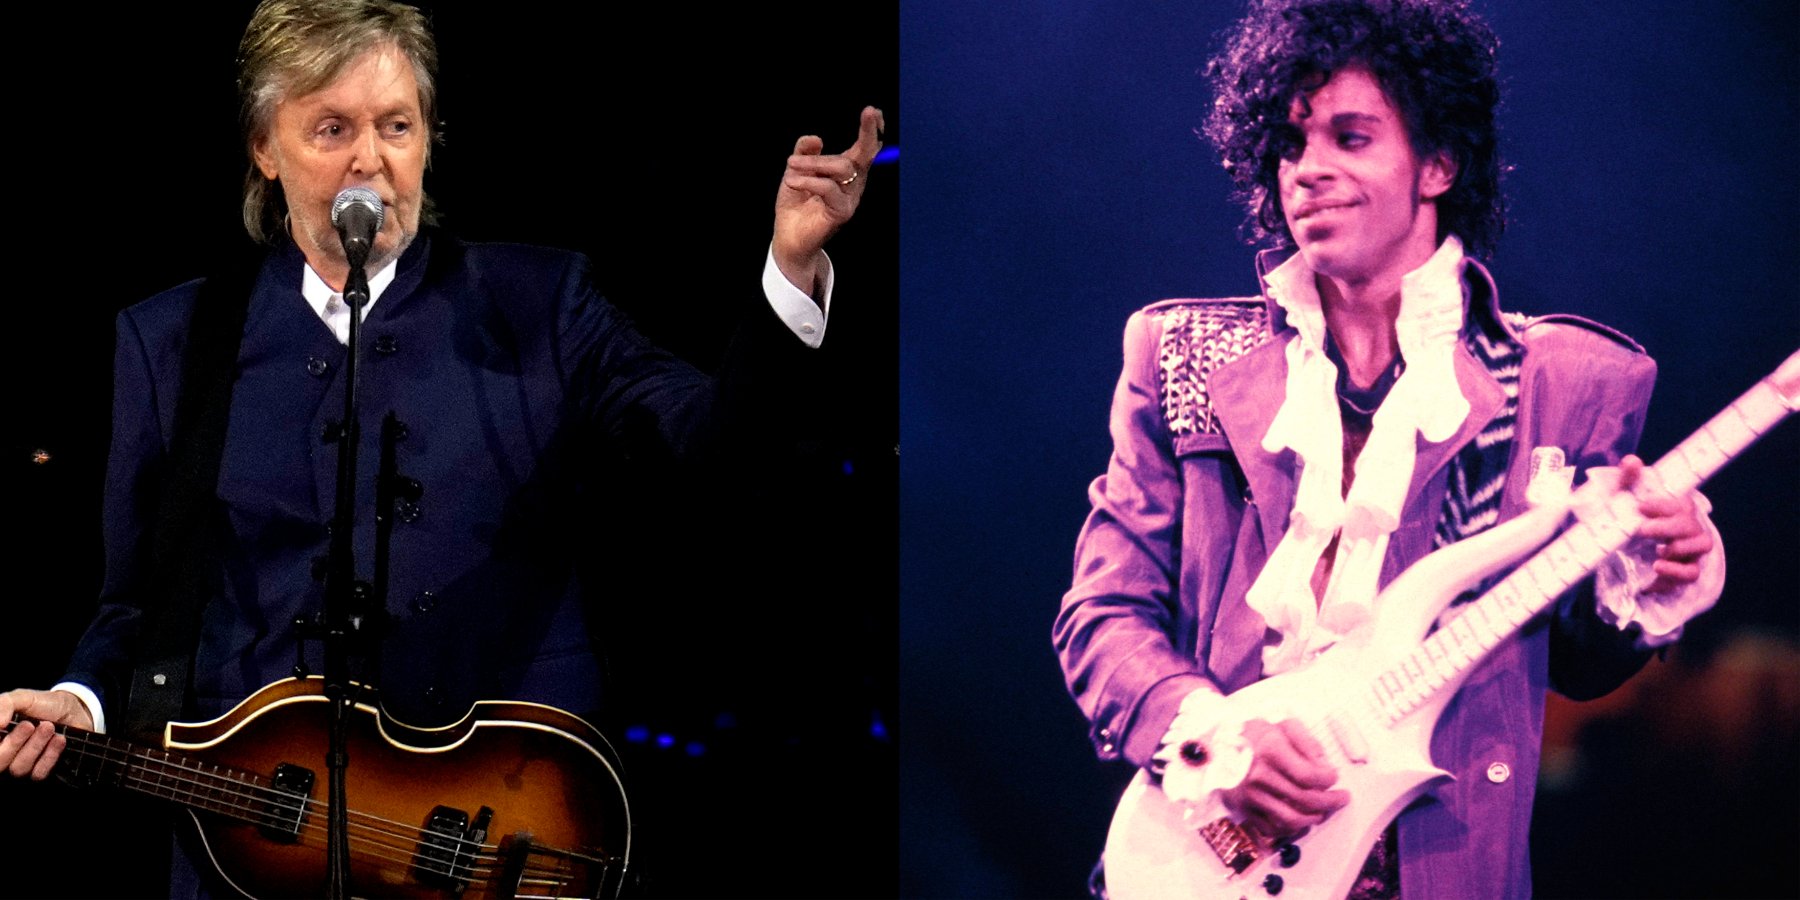 Paul McCartney in a side by side photograph with musician Prince.